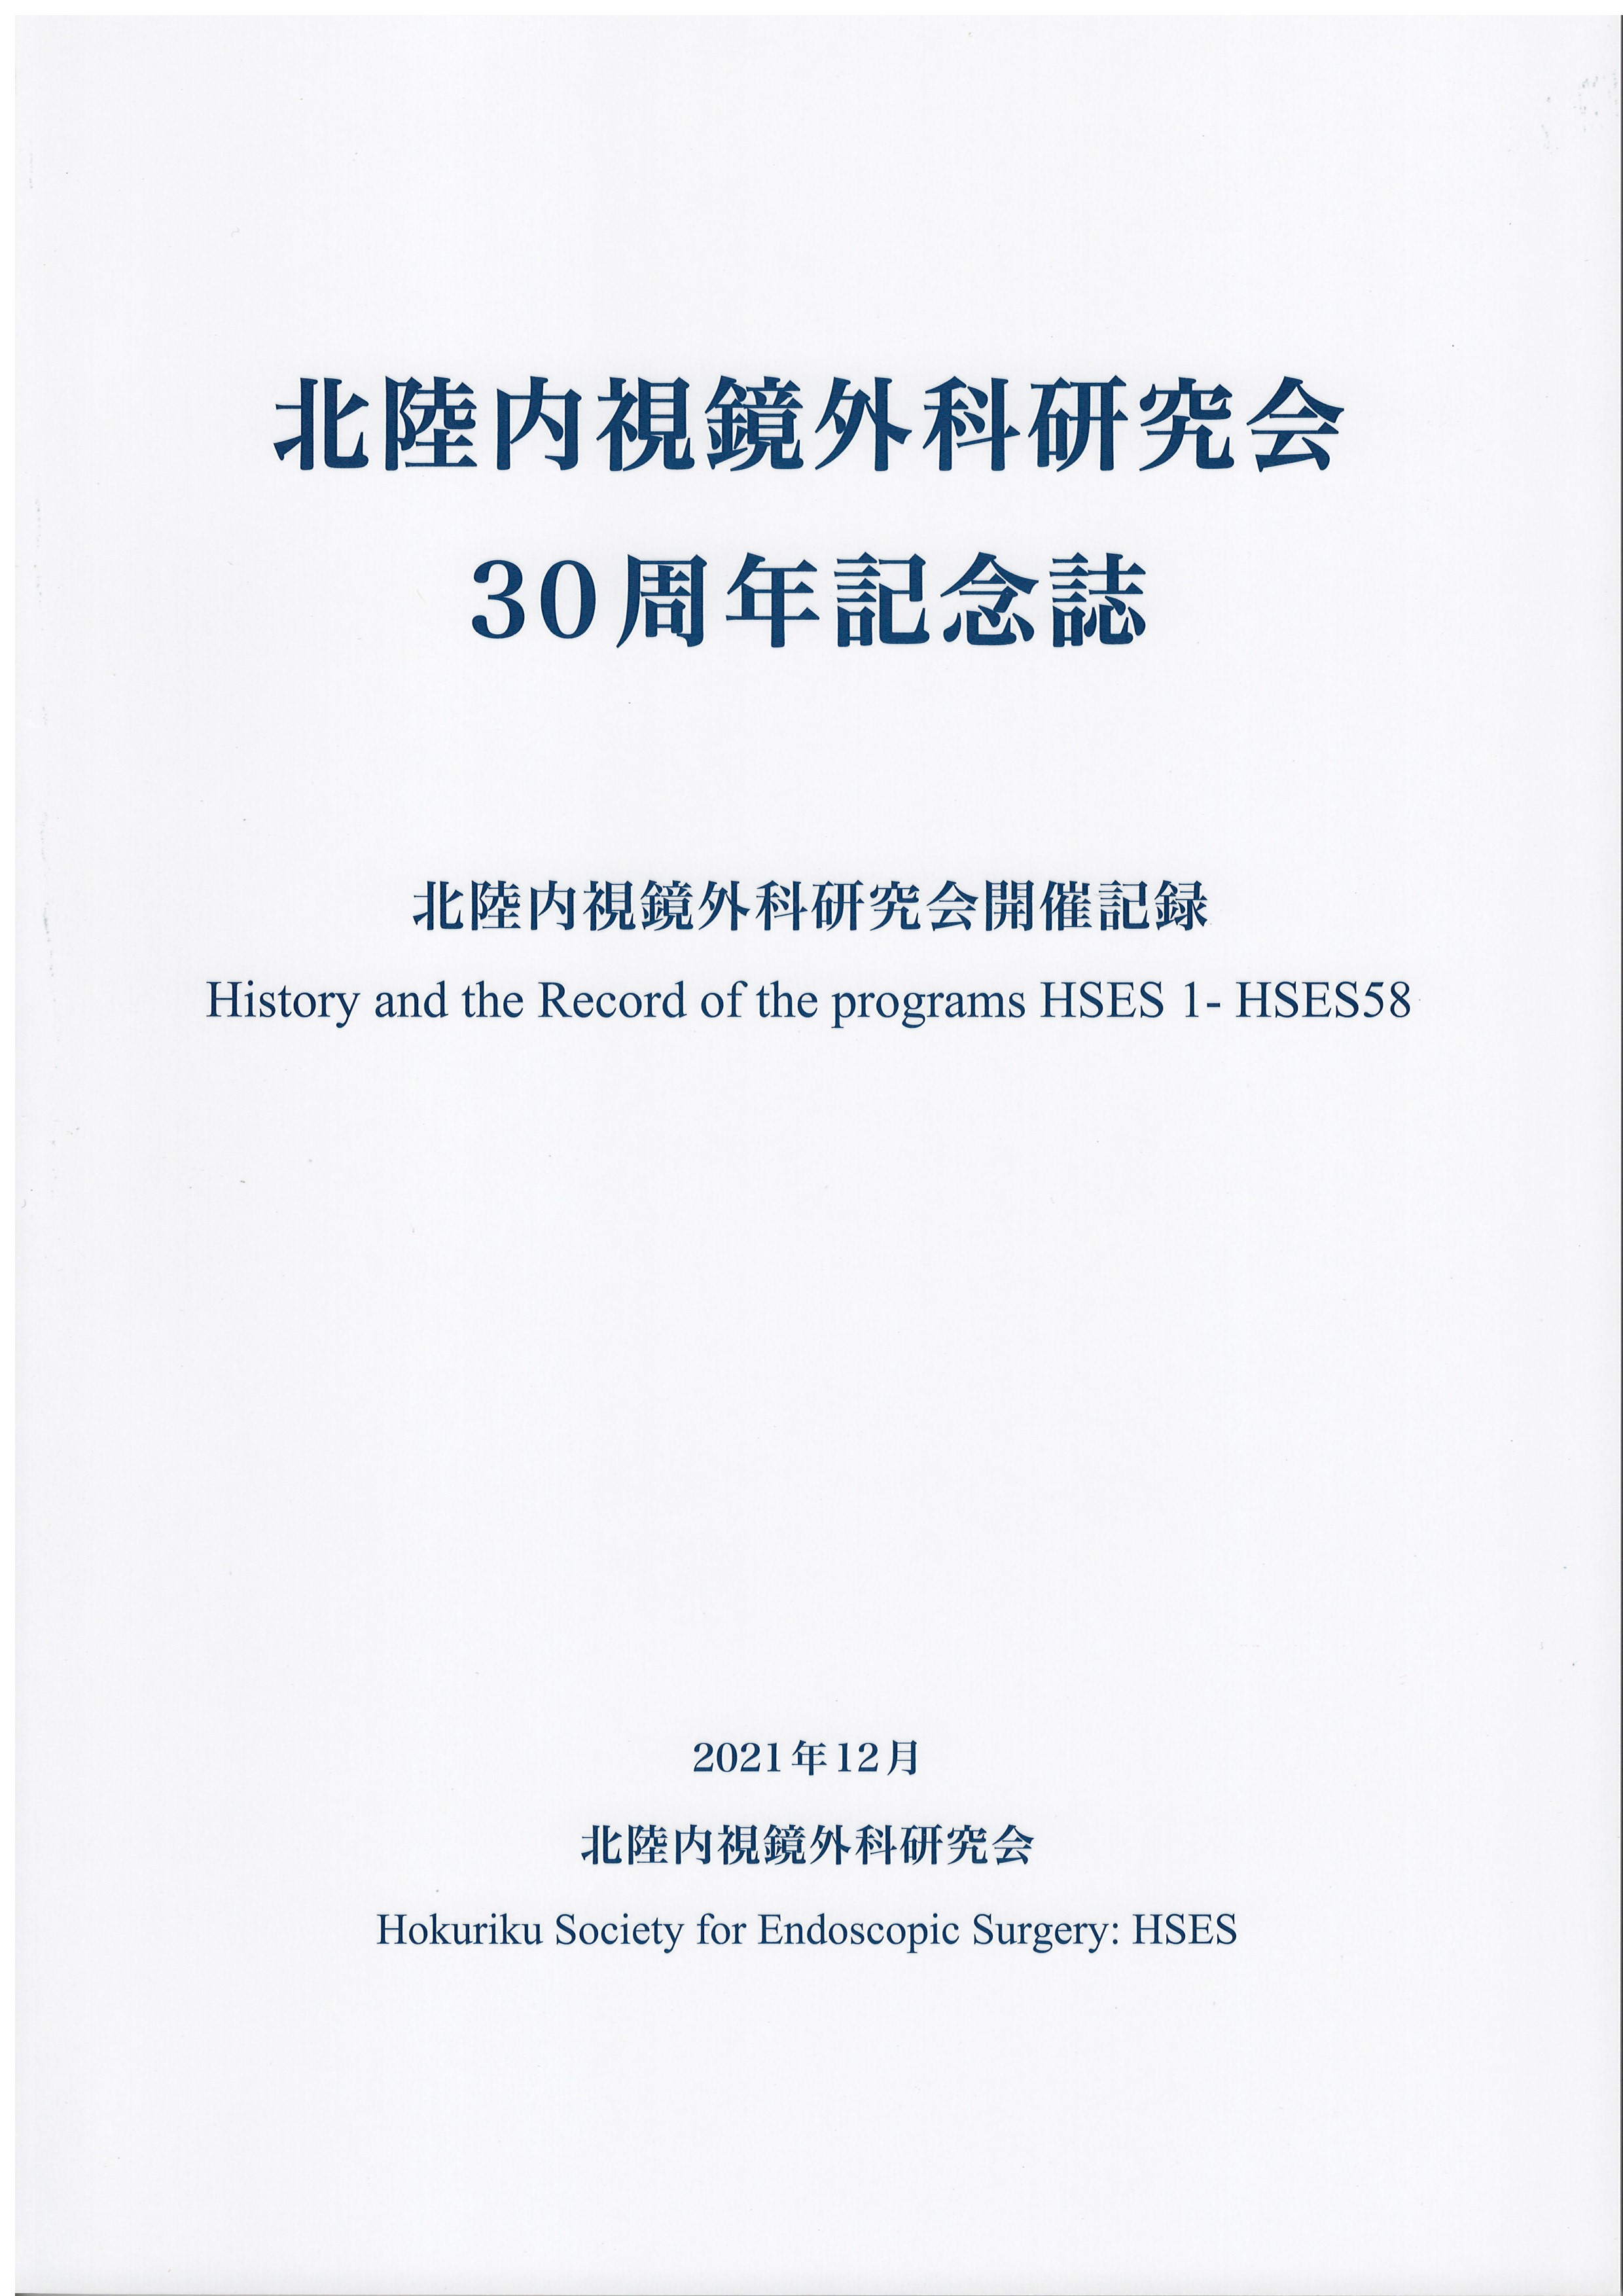 HSES 30周年記念誌